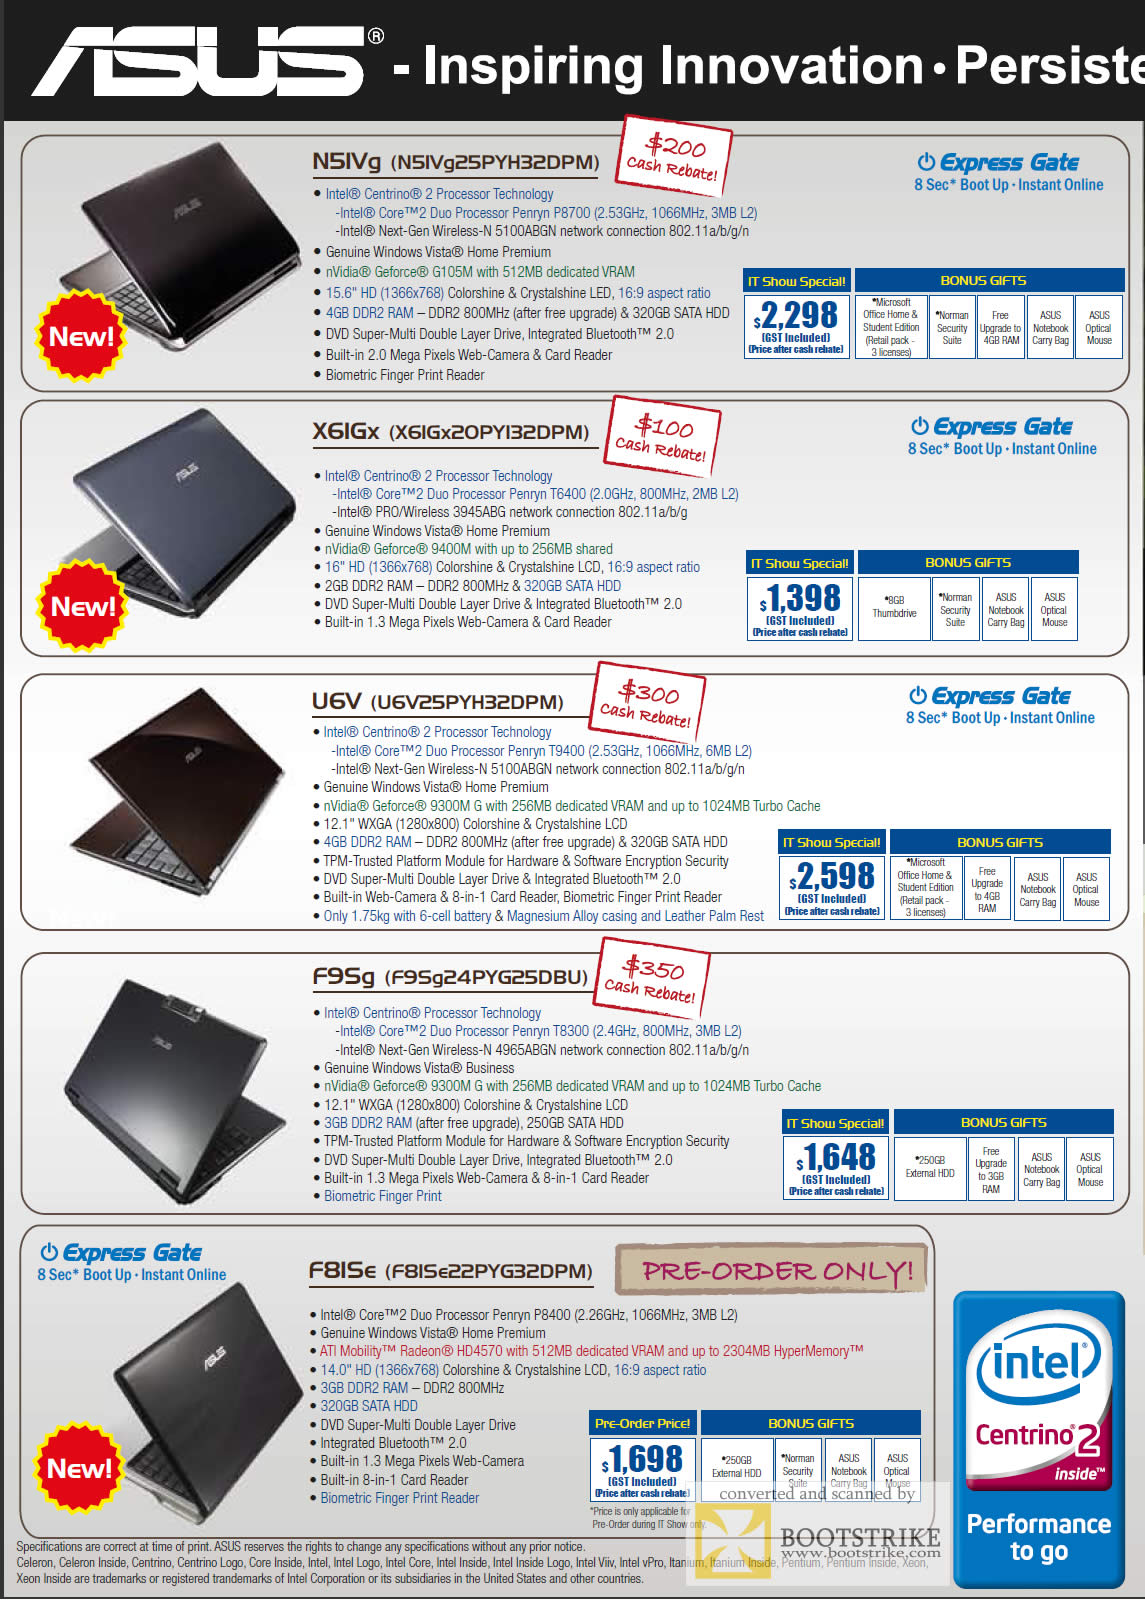 IT Show 2009 price list image brochure of ASUS Laptops 2